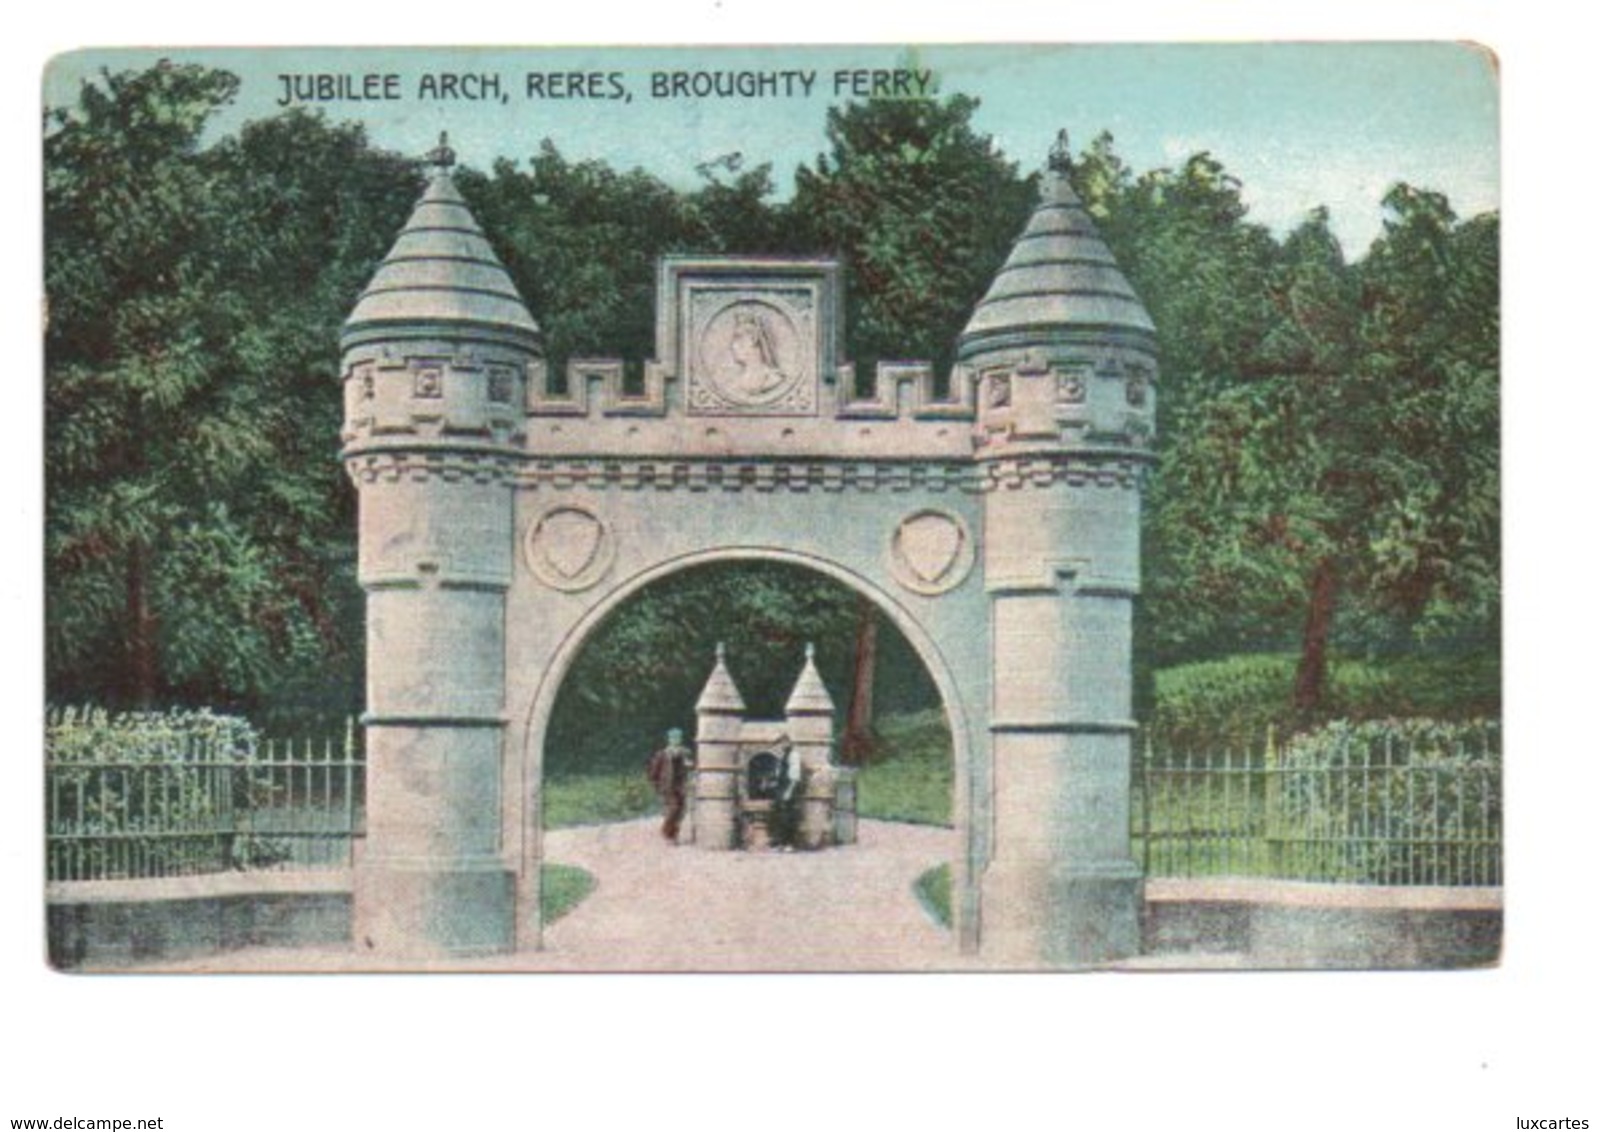 JUBILEE ARCH. RERES. BROUGHTY FERRY. - Angus